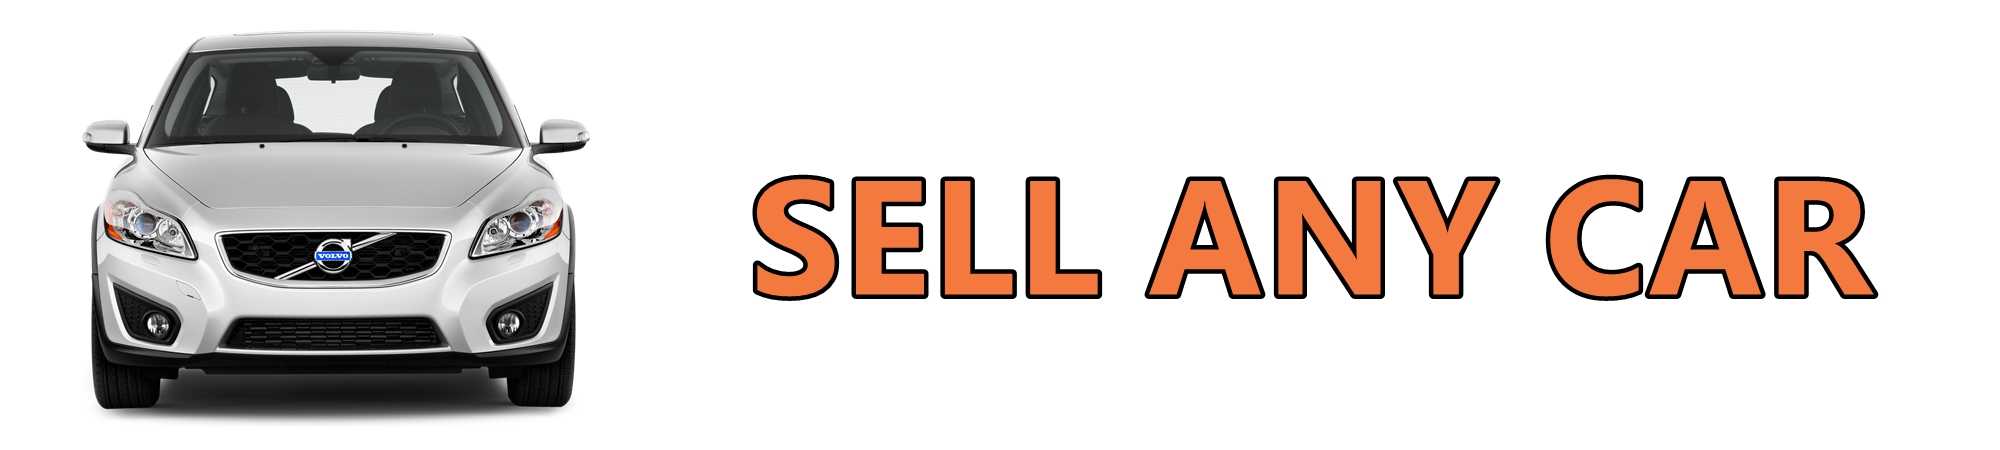 Sell any car - Sell used car online in Dubai